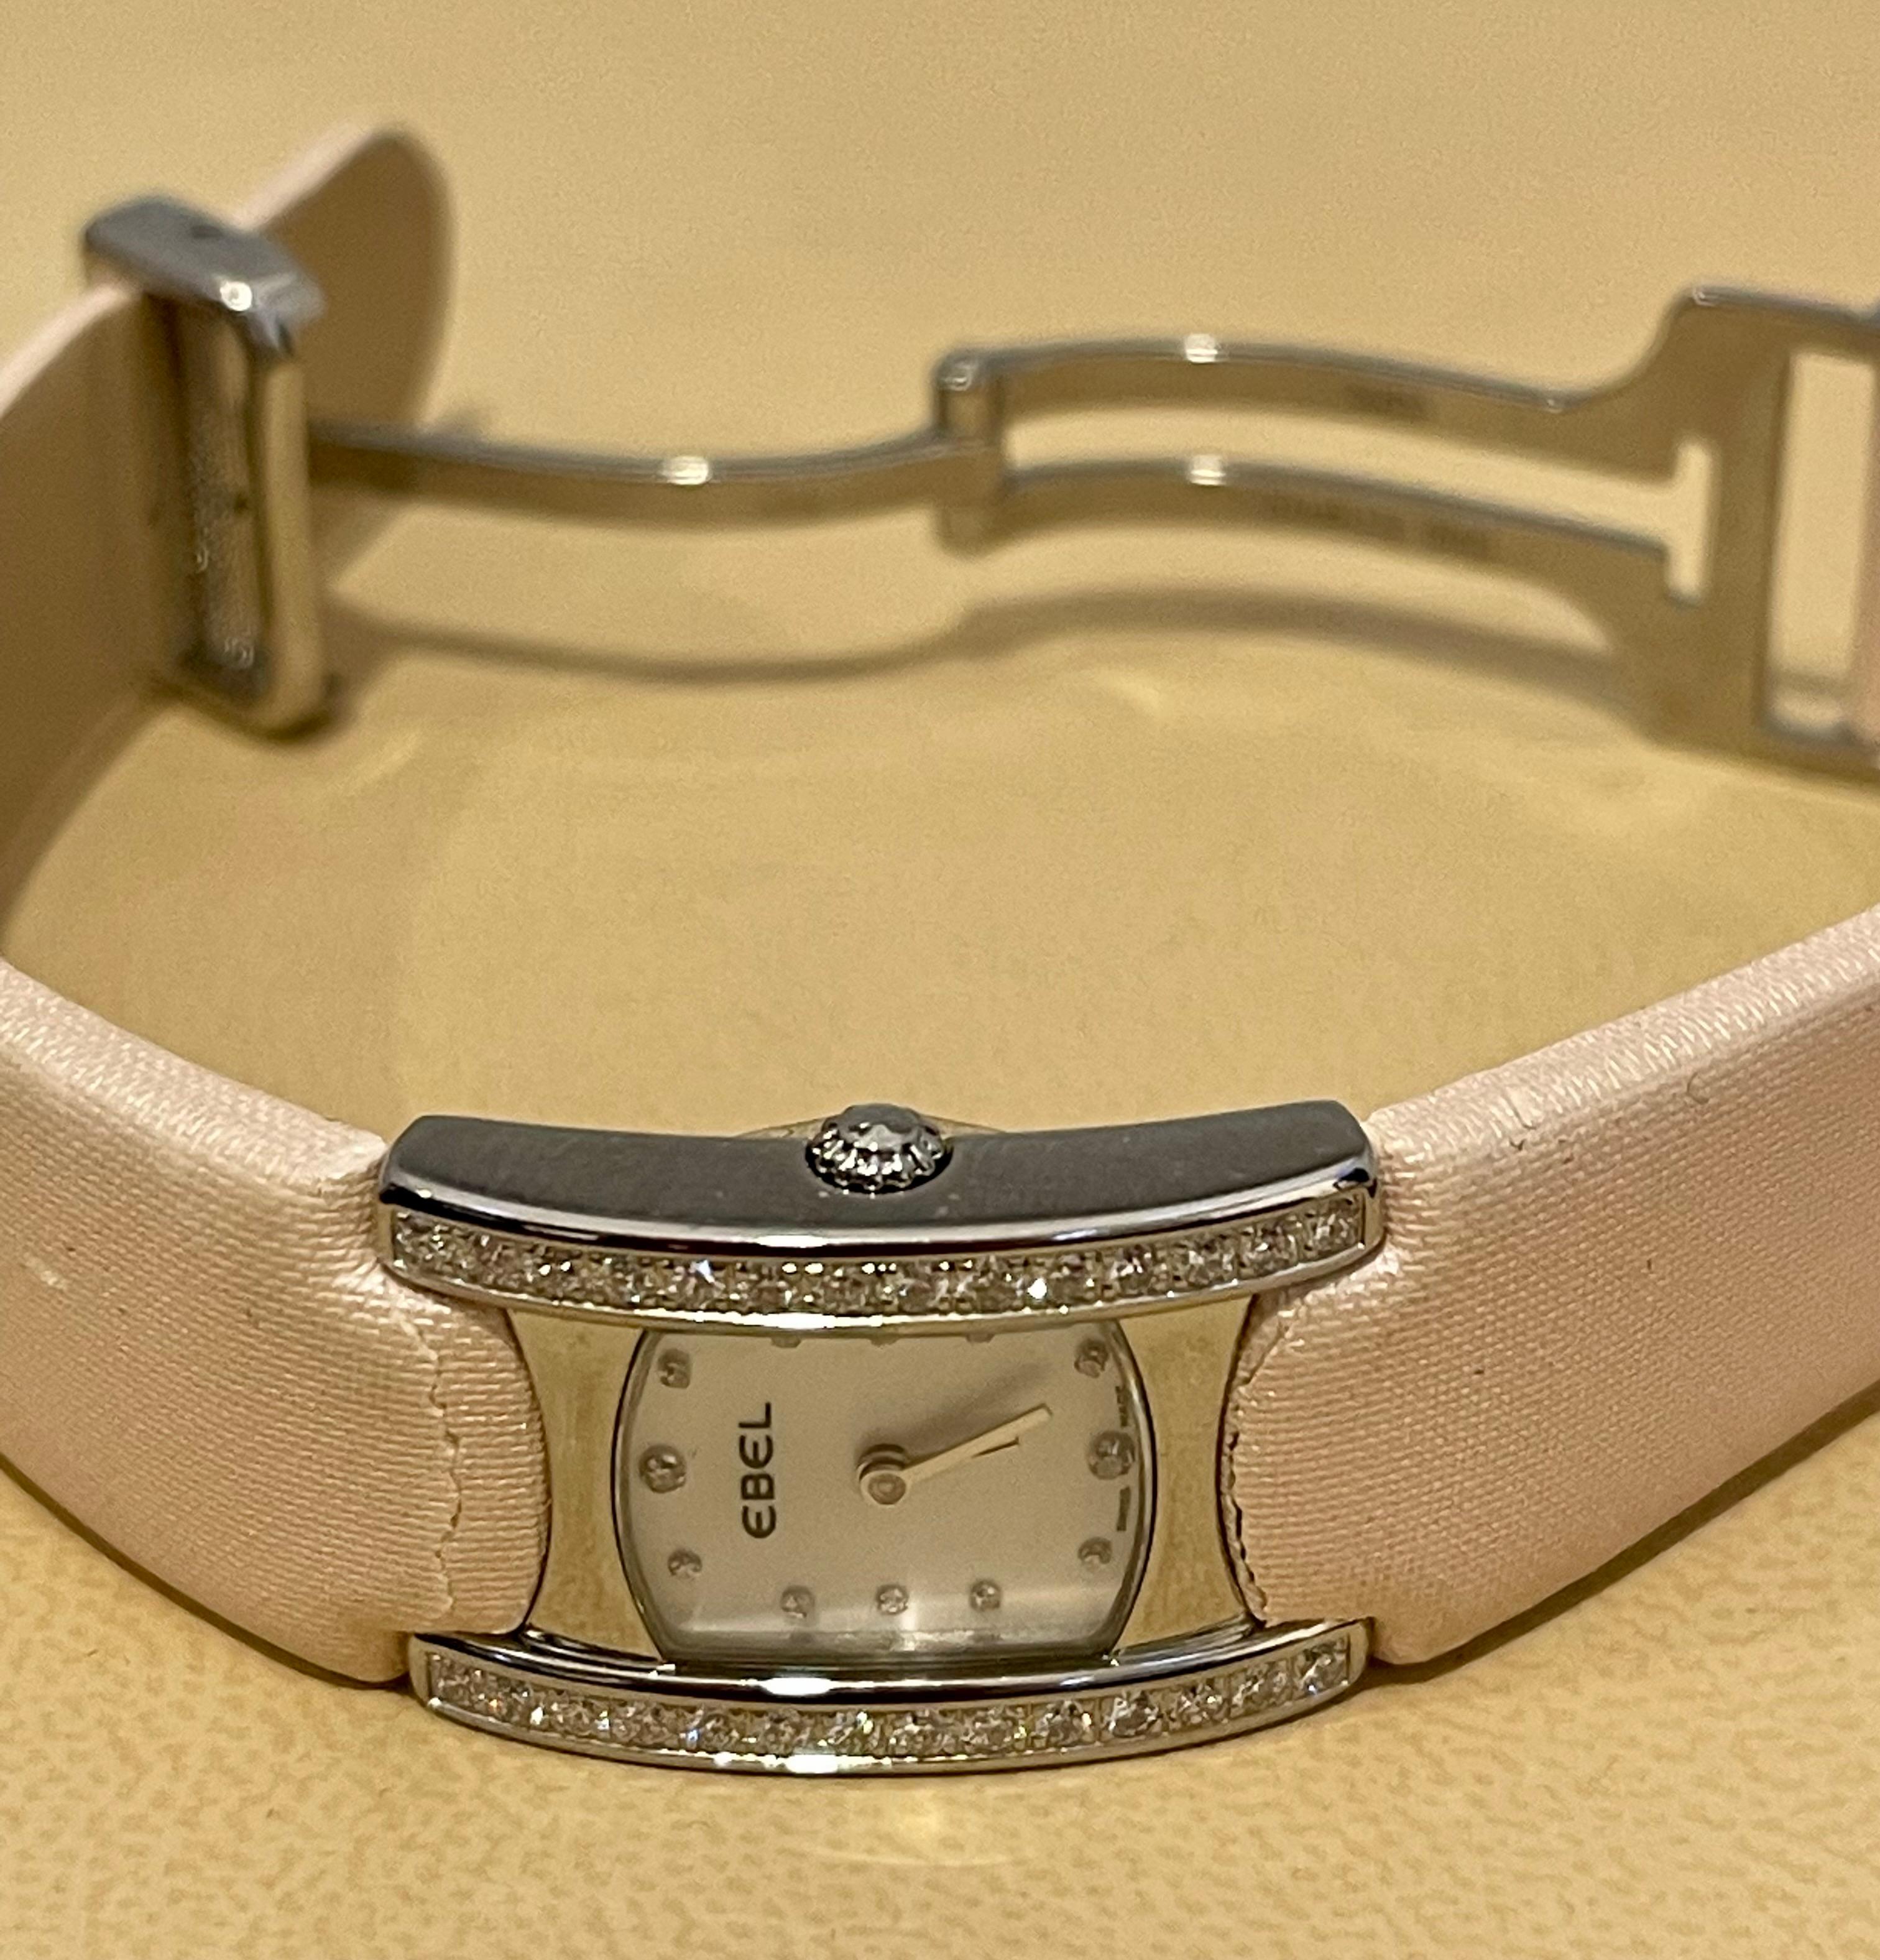 Pre owned
Ebel Beluga Ladies Watch. Stainless steel 19mm case with diamonds. Mother of pearl dial with diamonds. Pink leather strap with a stainless steel deployment buckle. Quartz battery movement.
Leather Belt 
42554980
Swiss made
Belt has little